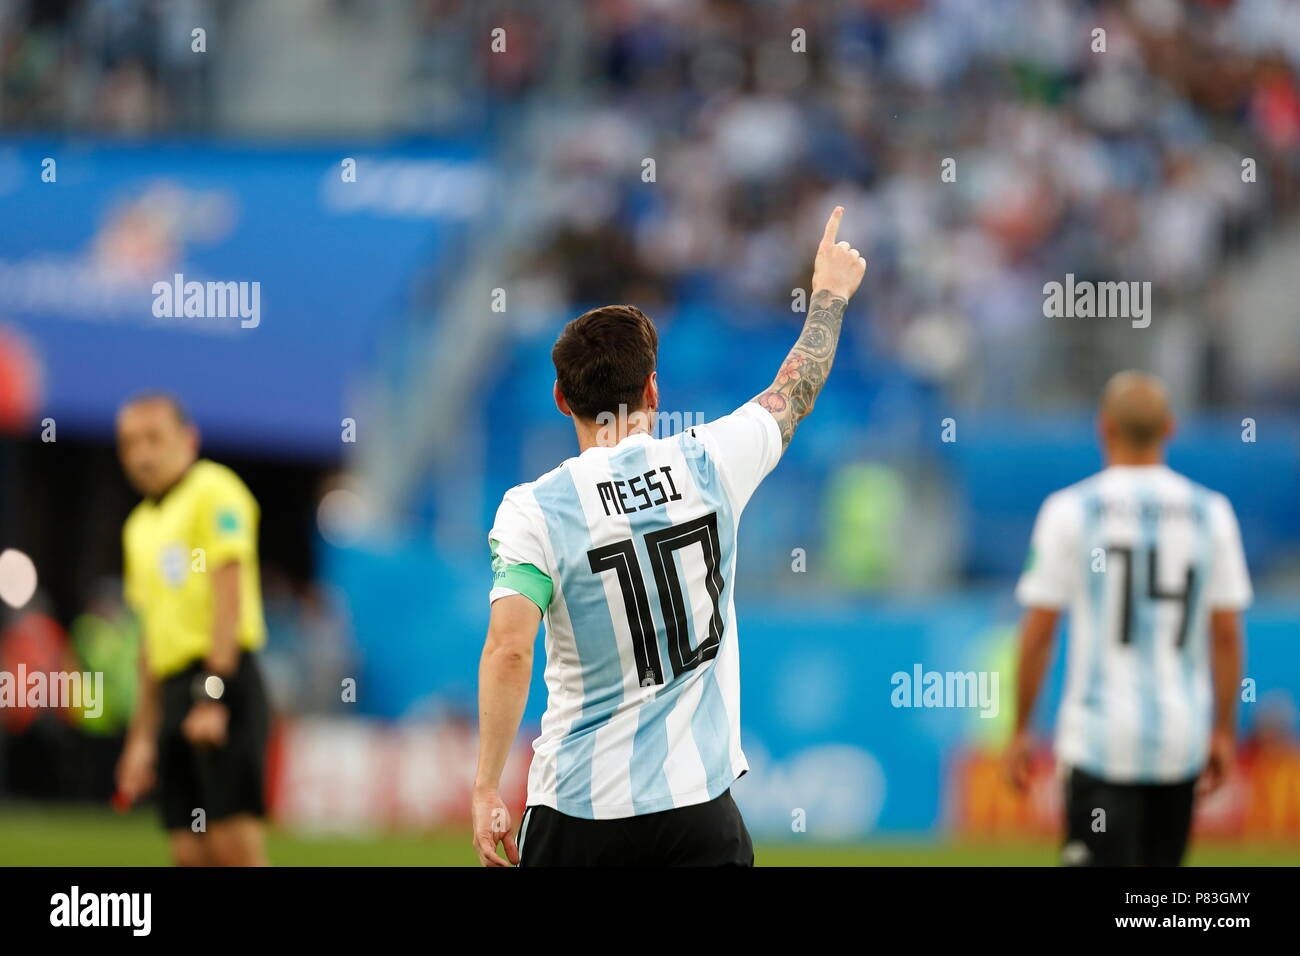 Saint Petersburg, Russia. 26th June, 2018. Lionel Messi (ARG) Football/Soccer : Messi celebrate after his goal on FIFA World Cup Russia 2018 match between Nigeria 1-2 Argentina at the Saint Petersburg Stadium in Saint Petersburg, Russia . Credit: Mutsu KAWAMORI/AFLO/Alamy Live News Stock Photo